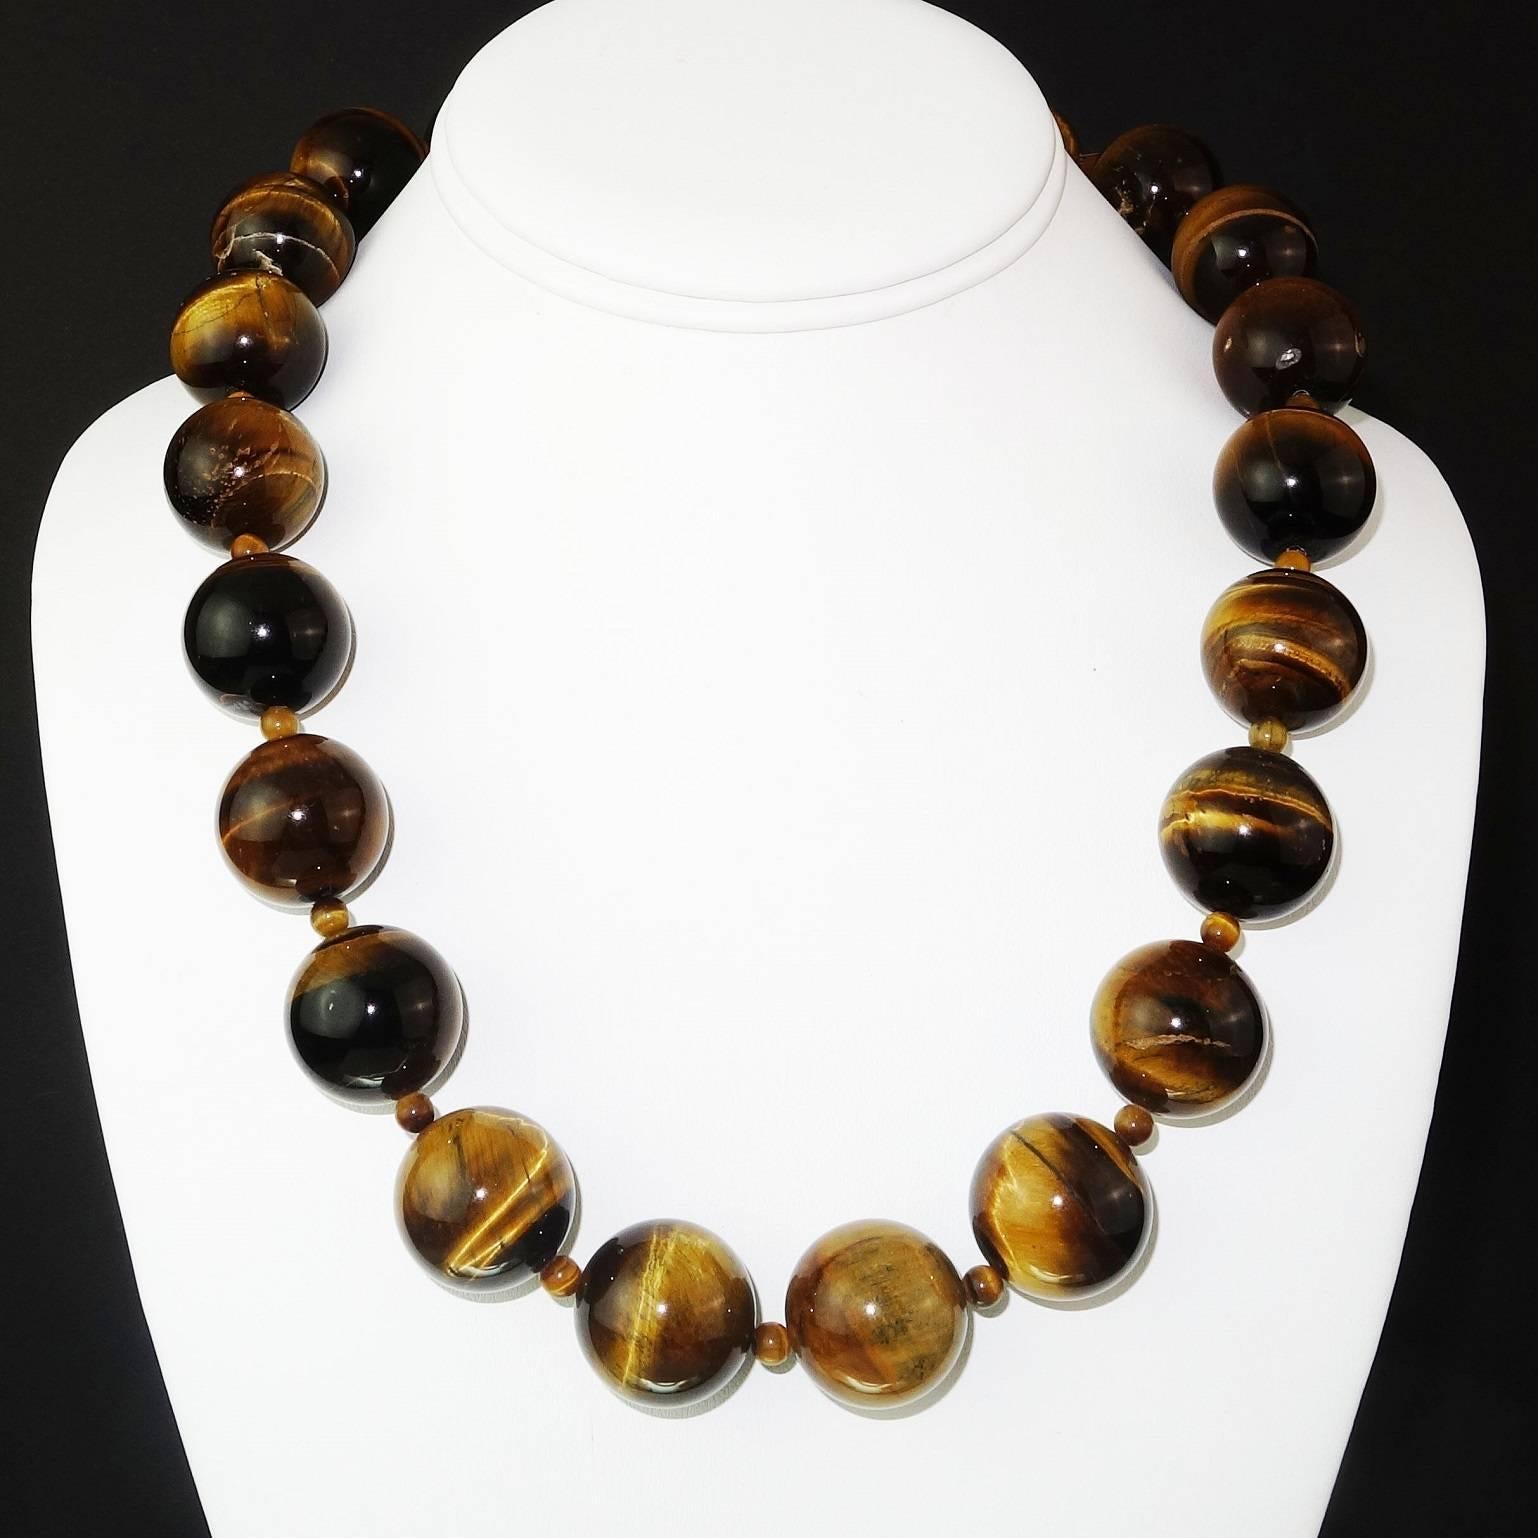 Artisan Gemjunky Glowing Highly Polished Tiger’s Eye Necklace with 18K Yellow Gold Clasp